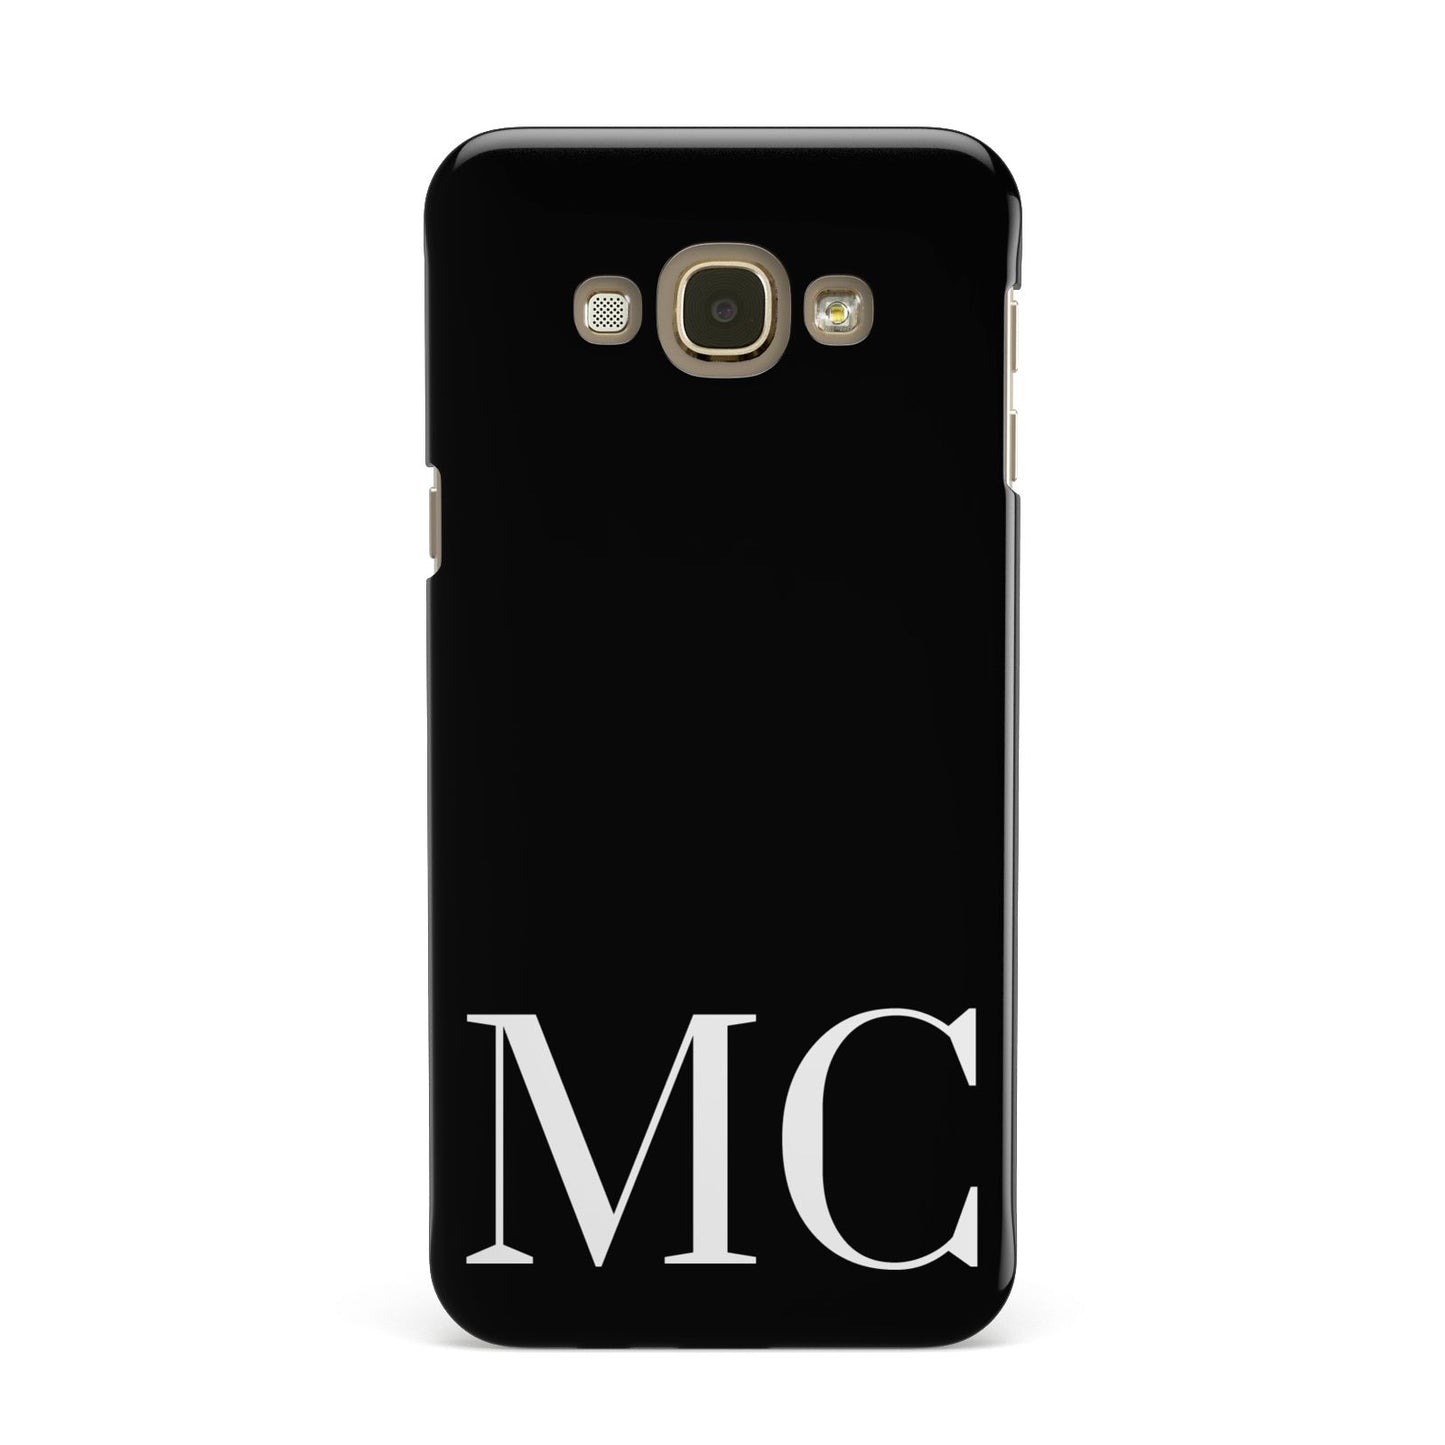 Initials Personalised 1 Samsung Galaxy A8 Case